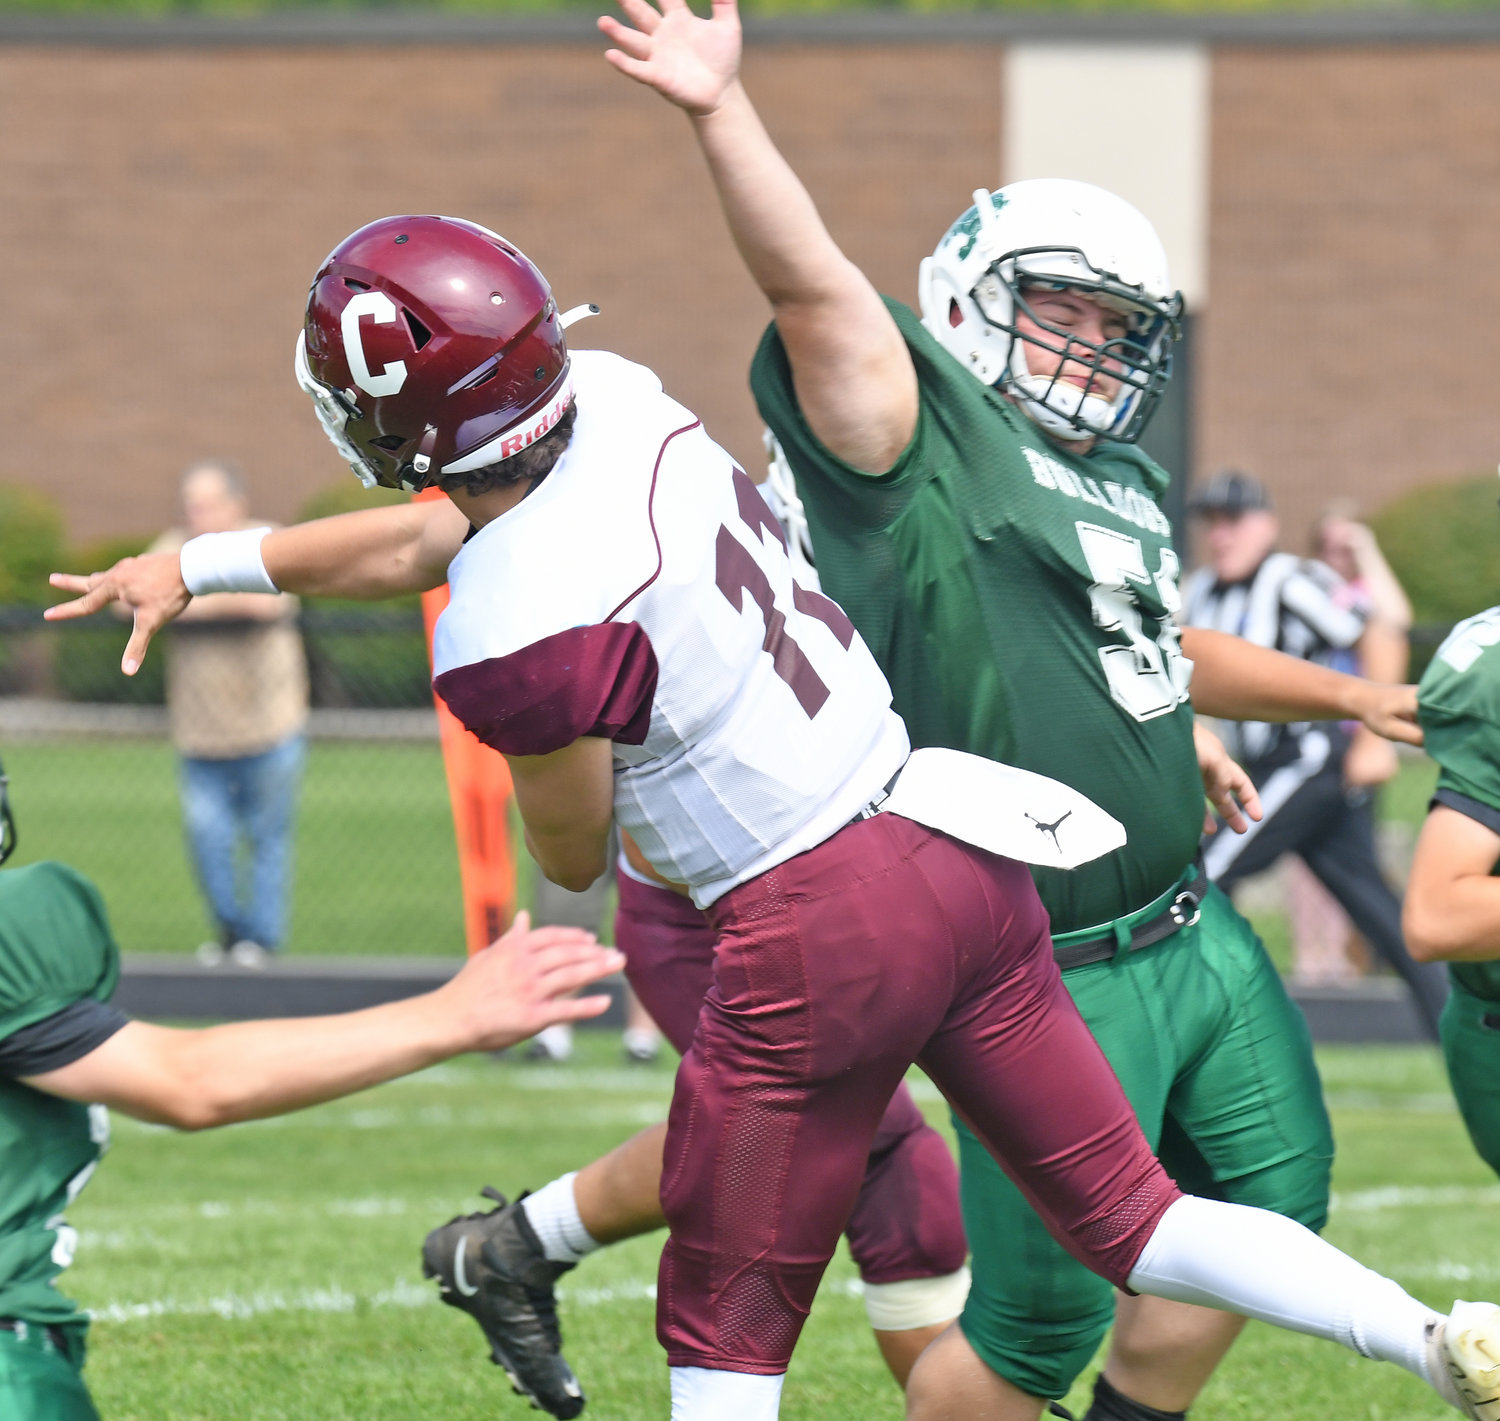 Clinton senior quarterback Ryan Chmielewski lets a touchdown pass fly with Westmoreland/Oriskany defensive lineman Aaron Wickham in his face in the first quarter of Saturday afternoon's non-league game in Westmoreland. The Warriors won 28-6.